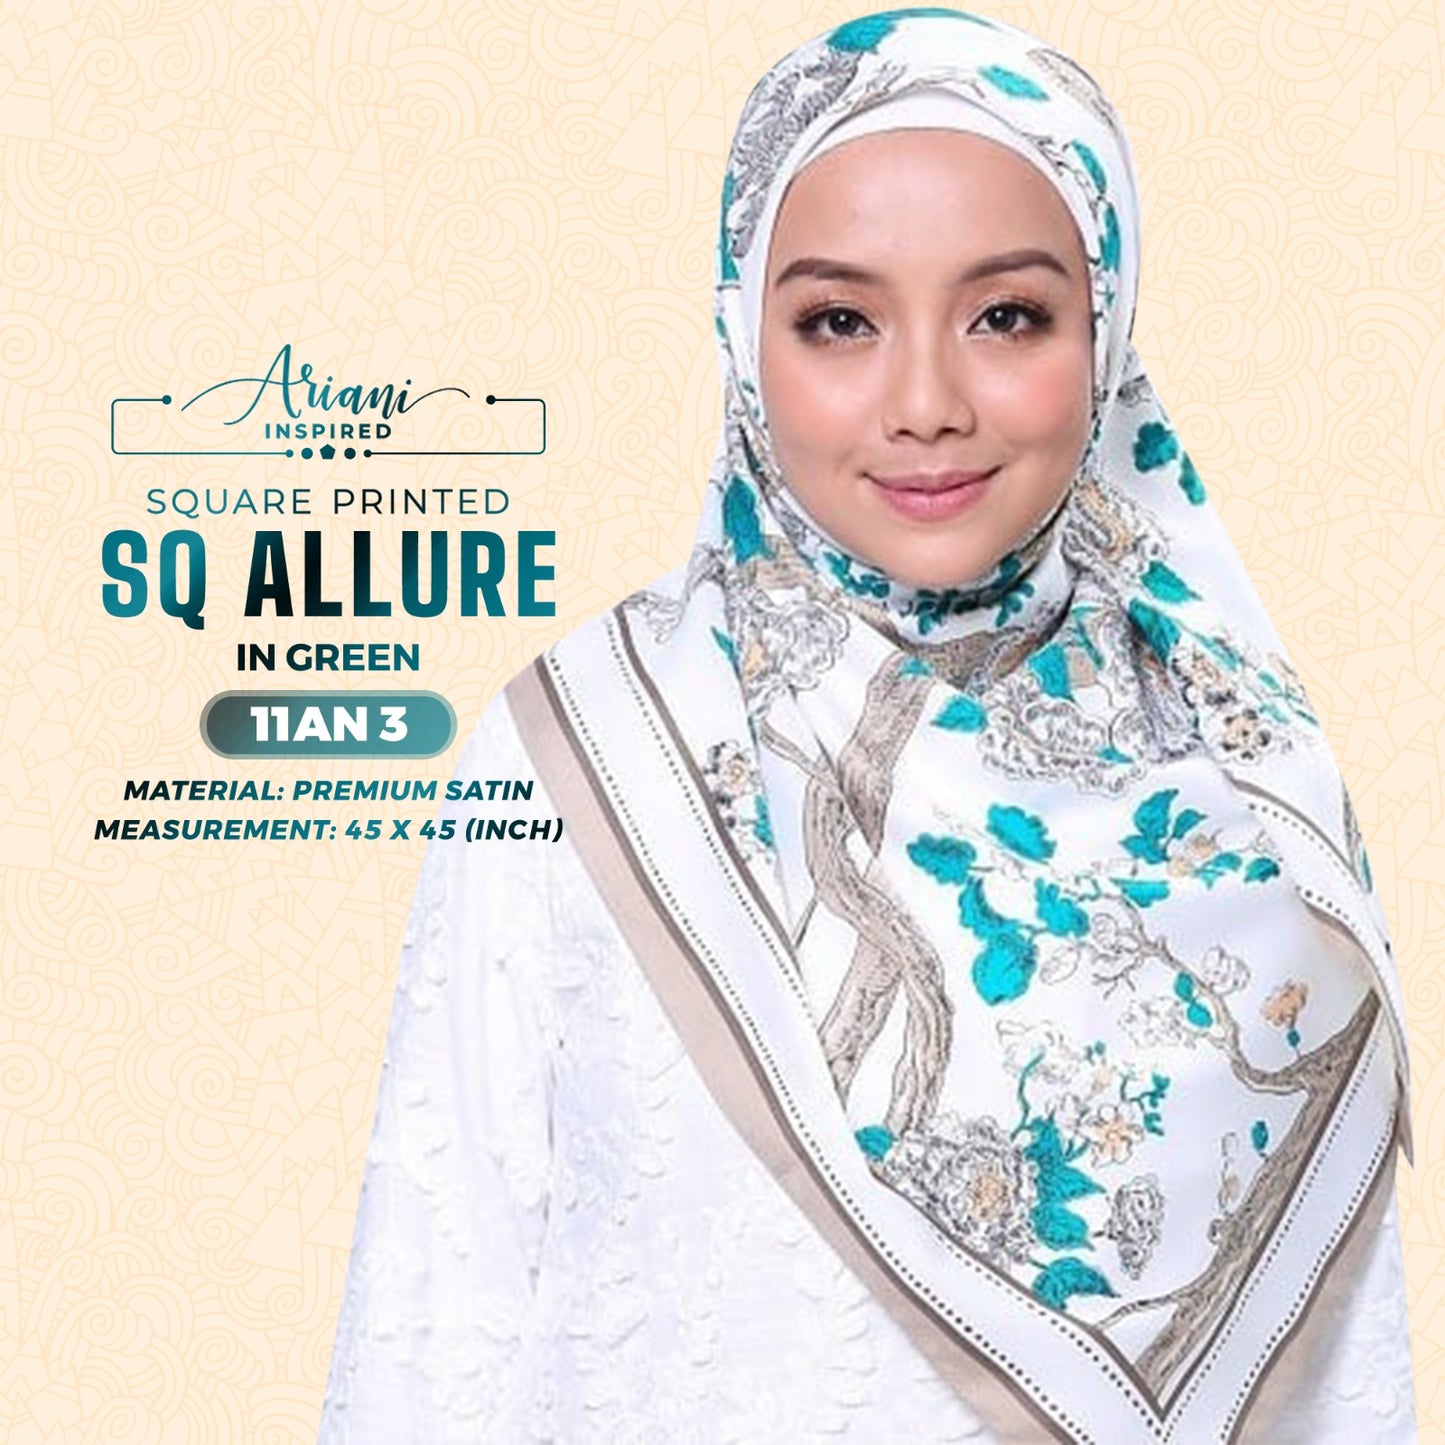 Ariani Inspired Allure Printed SQ Collection